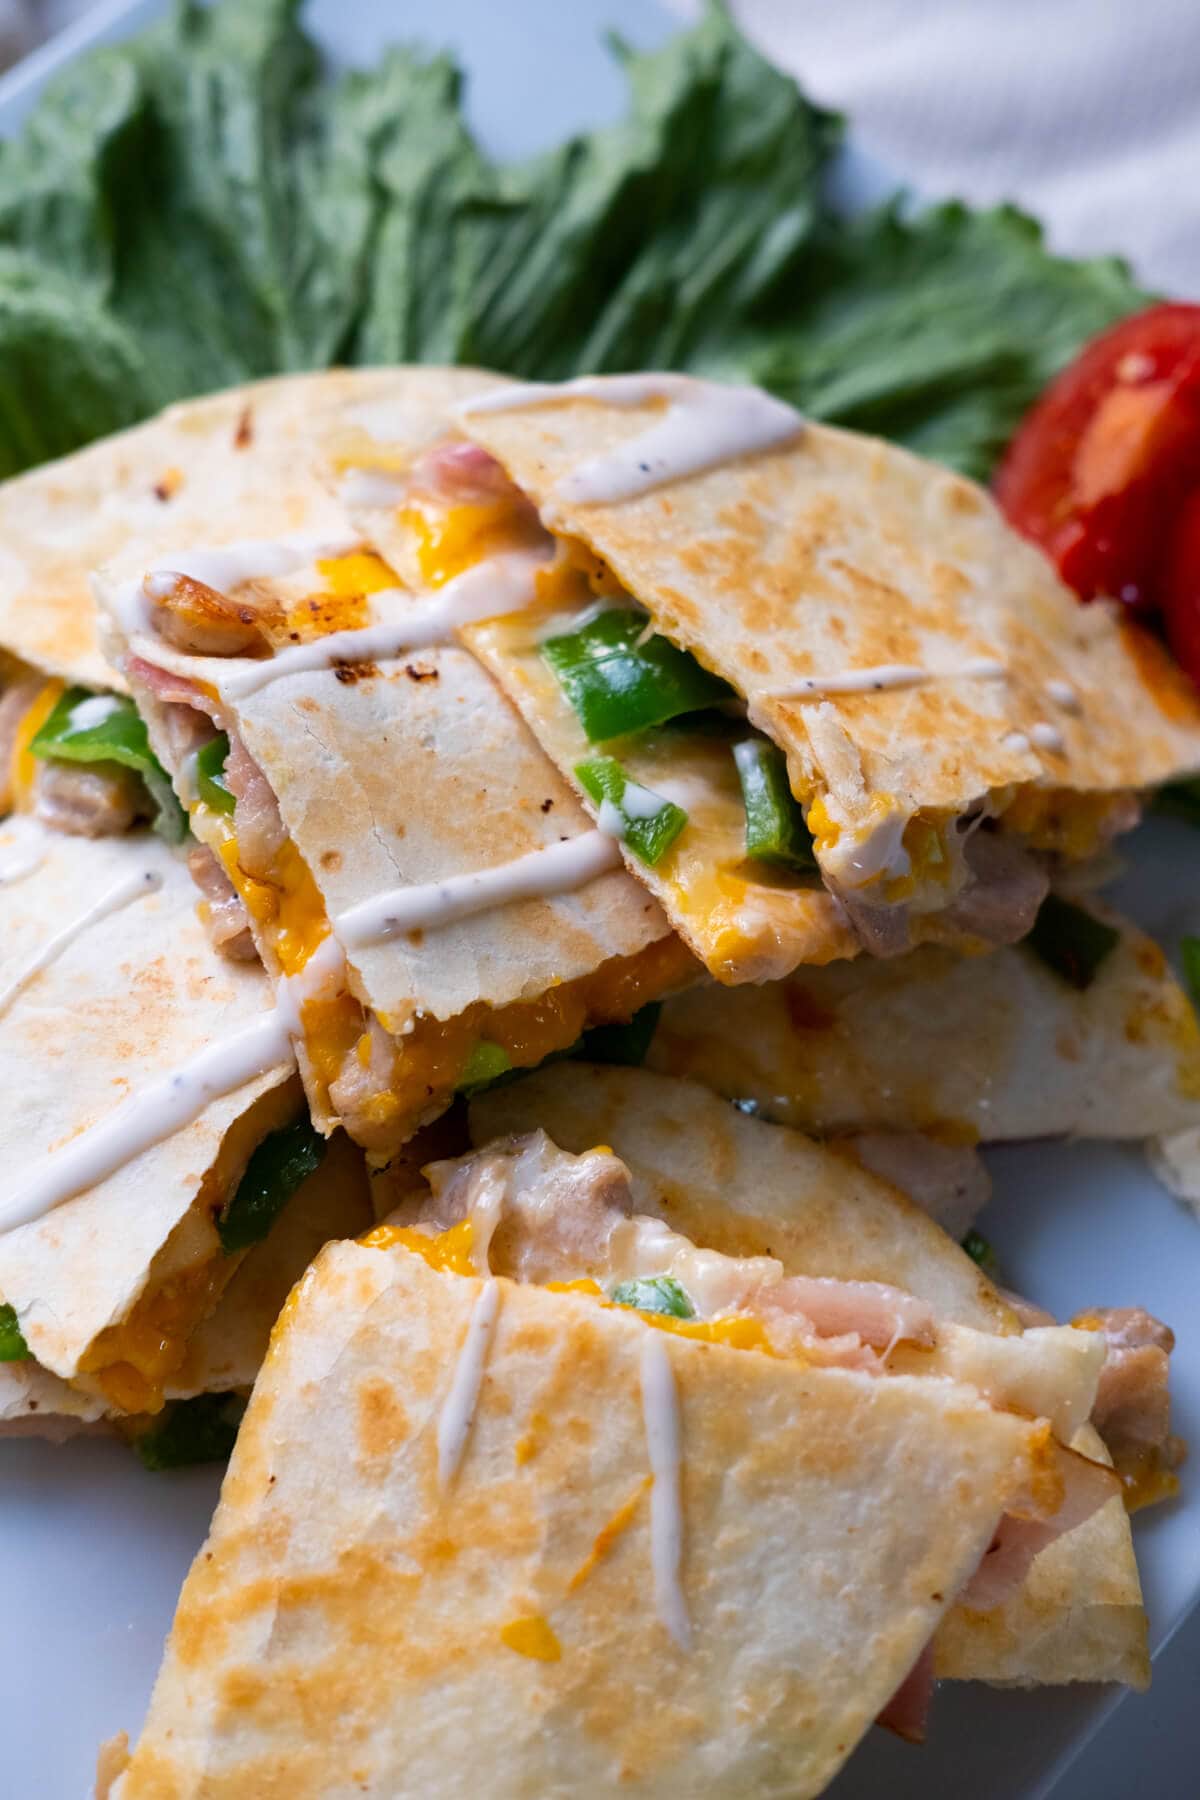 Chicken and bacon quesadilla with melty cheese, green pepper, chicken and bacon. 